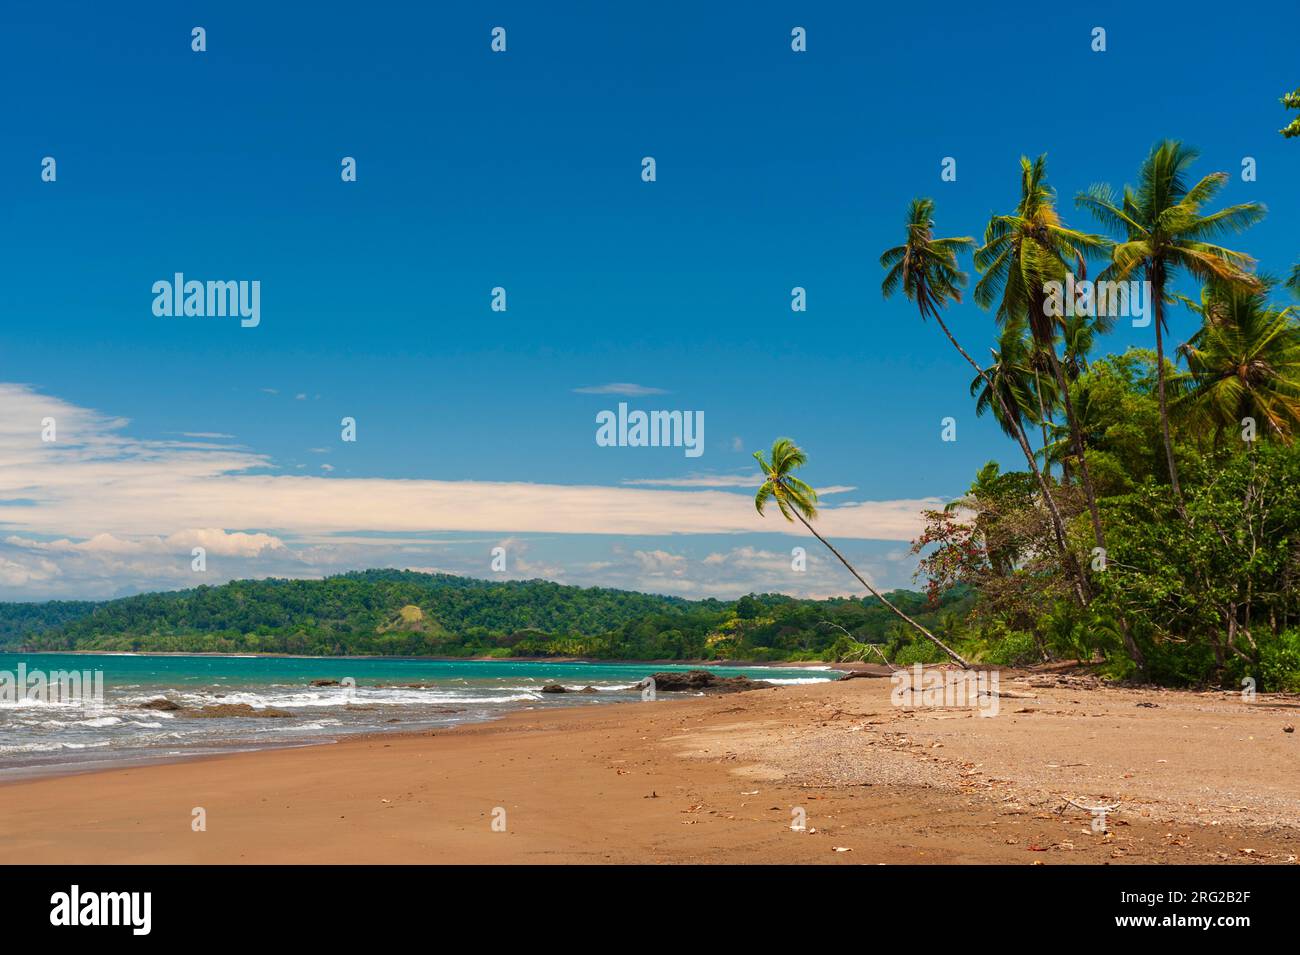 Palm trees and gentle surf on a sandy beach. Drake Bay, Osa Peninsula, Costa Rica. Stock Photo